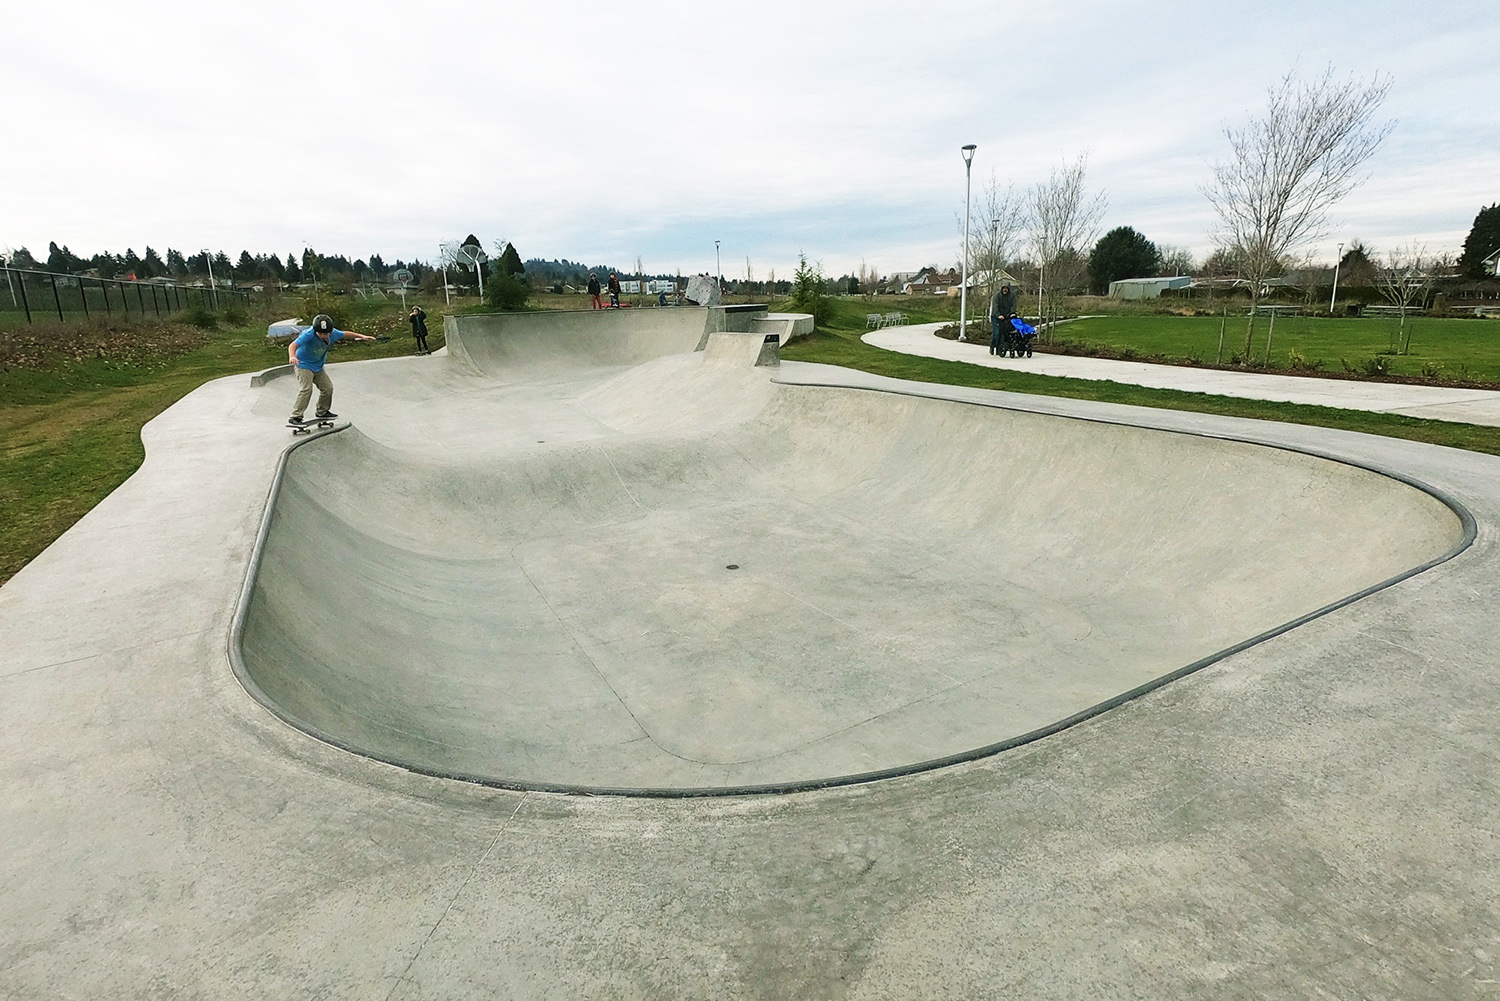  The four-foot bowl section of the Luuwit Skate Spot. 